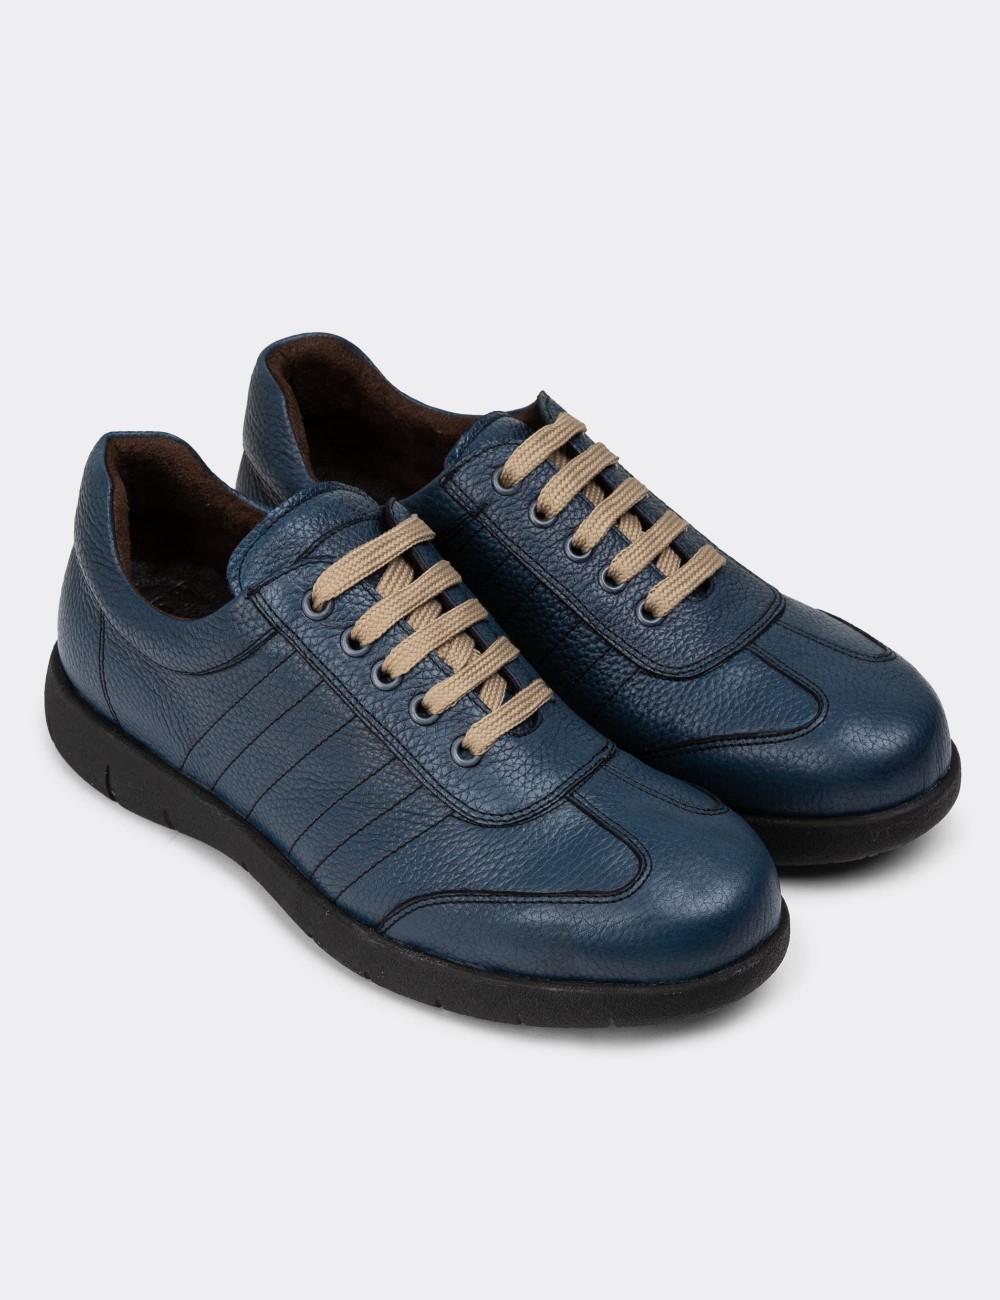 Blue Leather Lace-up Shoes - 01950MMVIC01